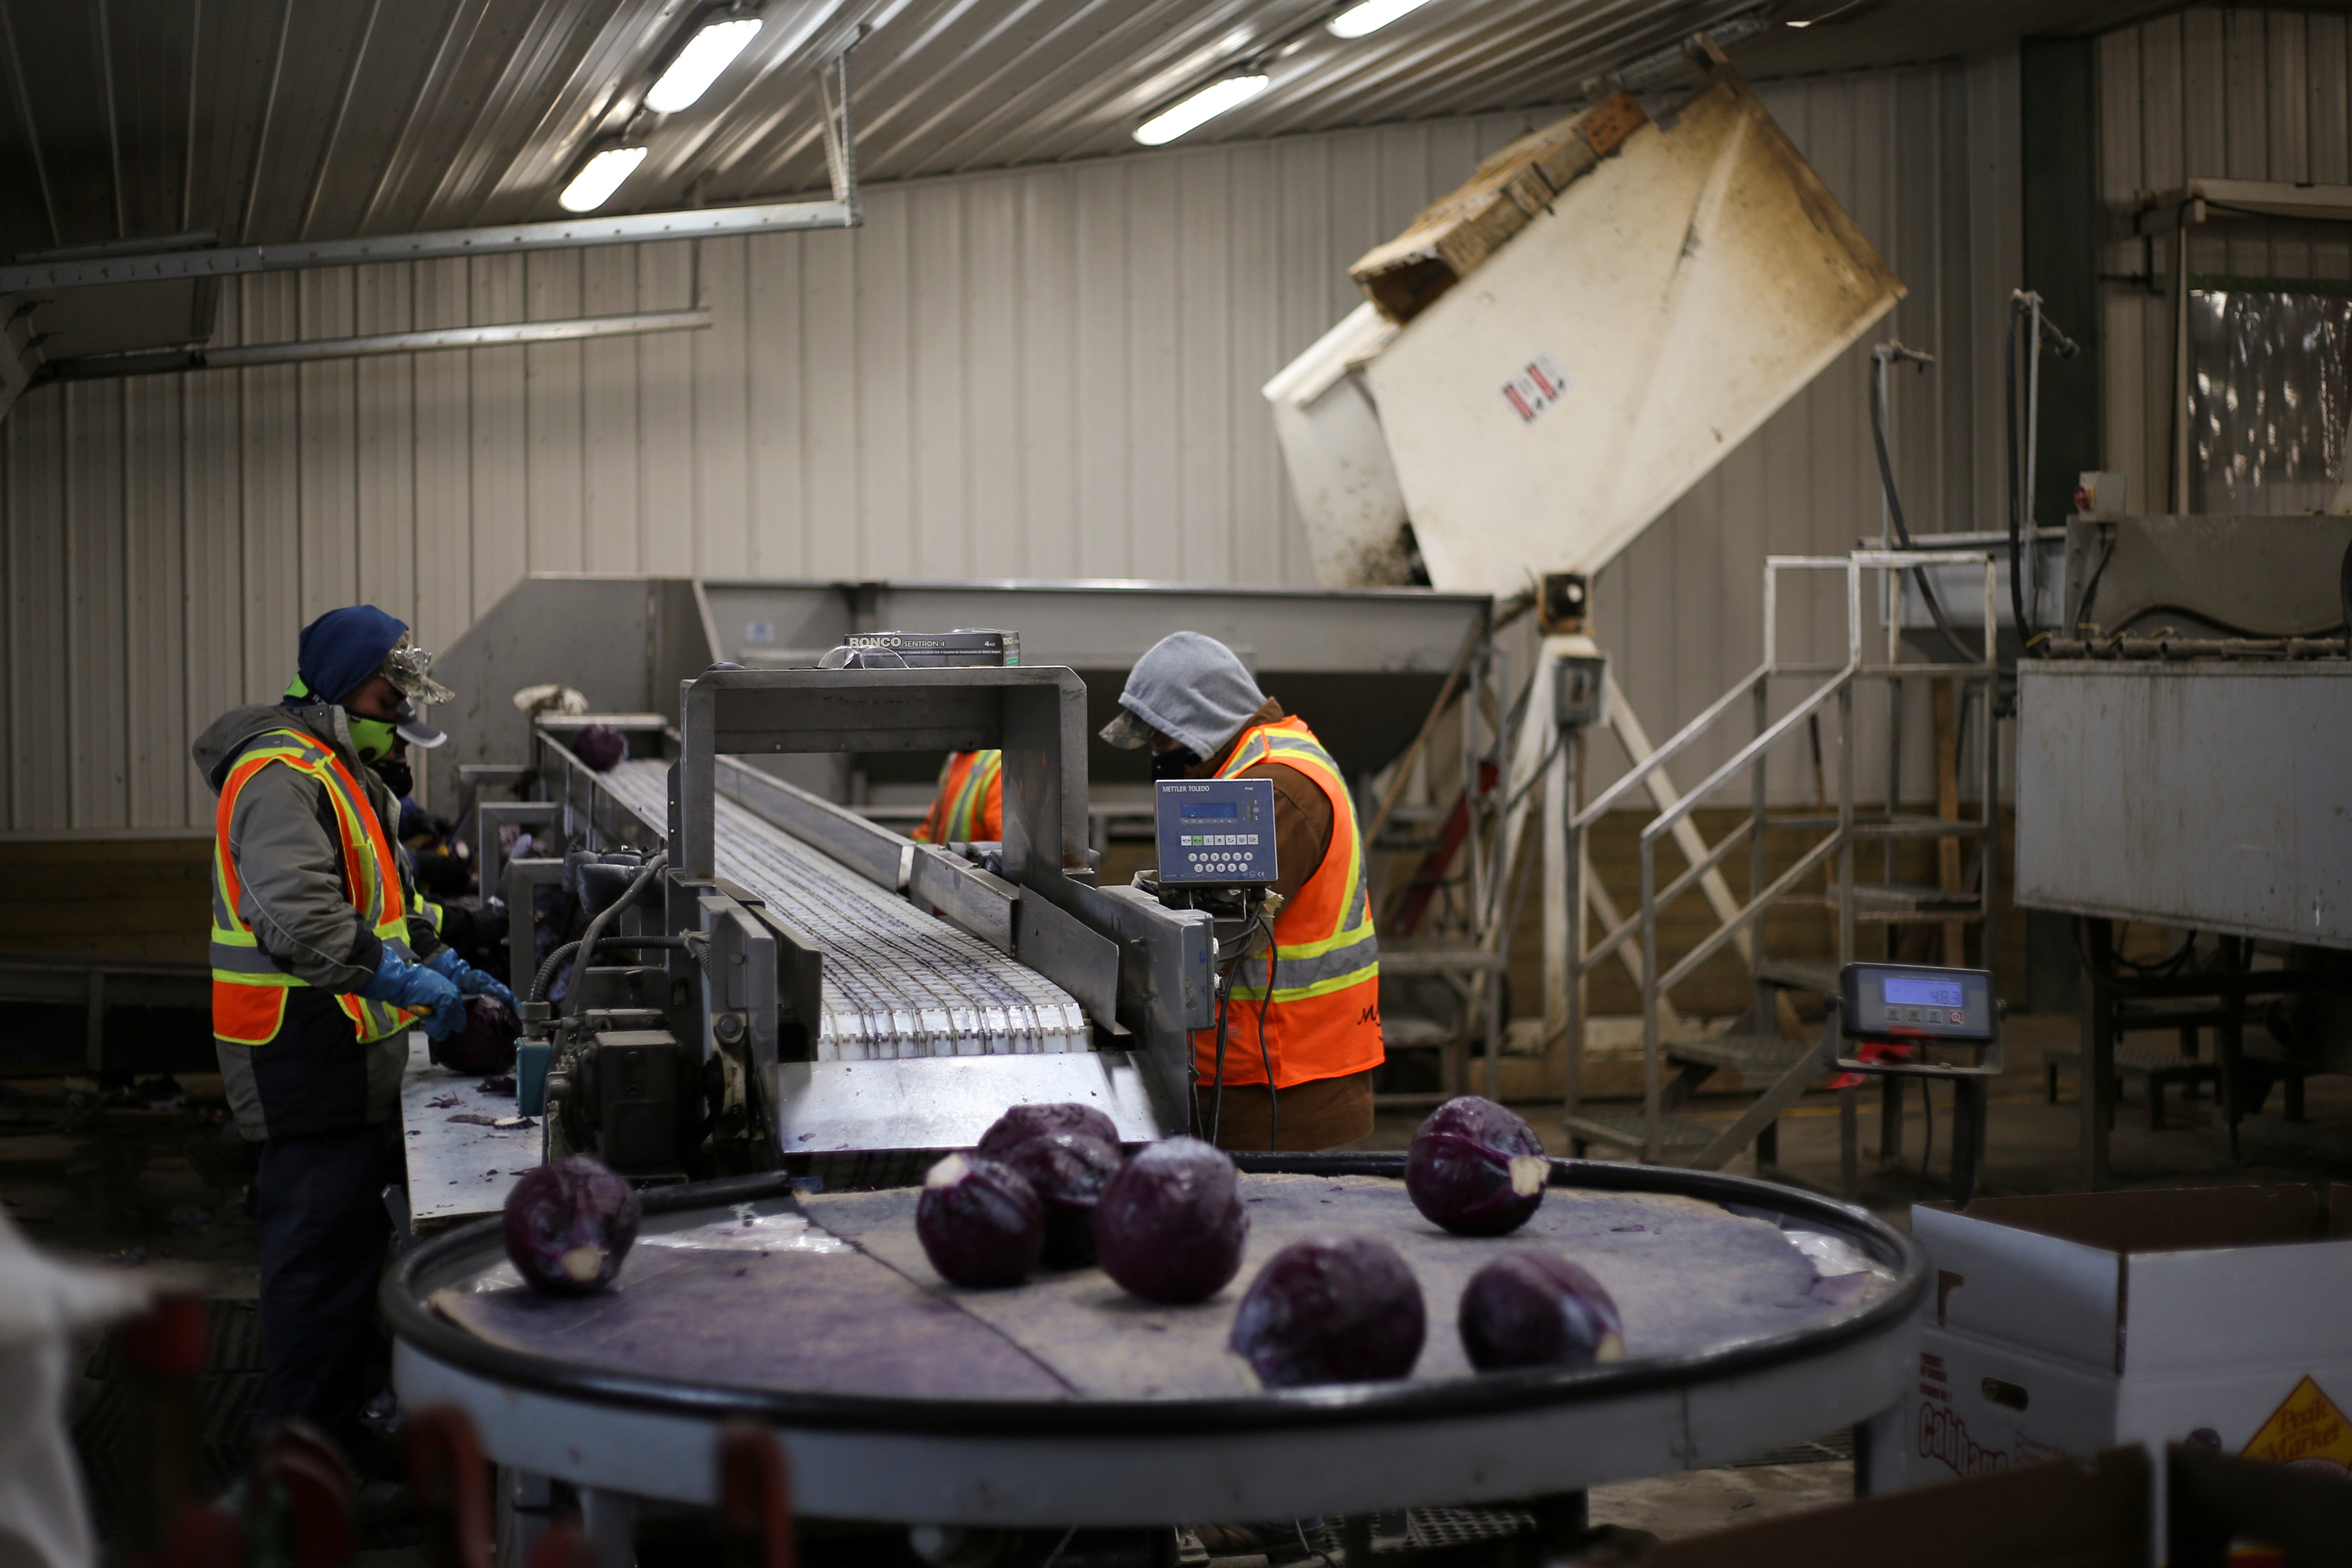 Migrant workers wear masks and practice social distancing to help slow the spread of the coronavirus disease (COVID-19) while trimming red cabbage at Mayfair Farms in Portage la Prairie, Manitoba, Canada April 28, 2020.  REUTERS/Shannon VanRaes